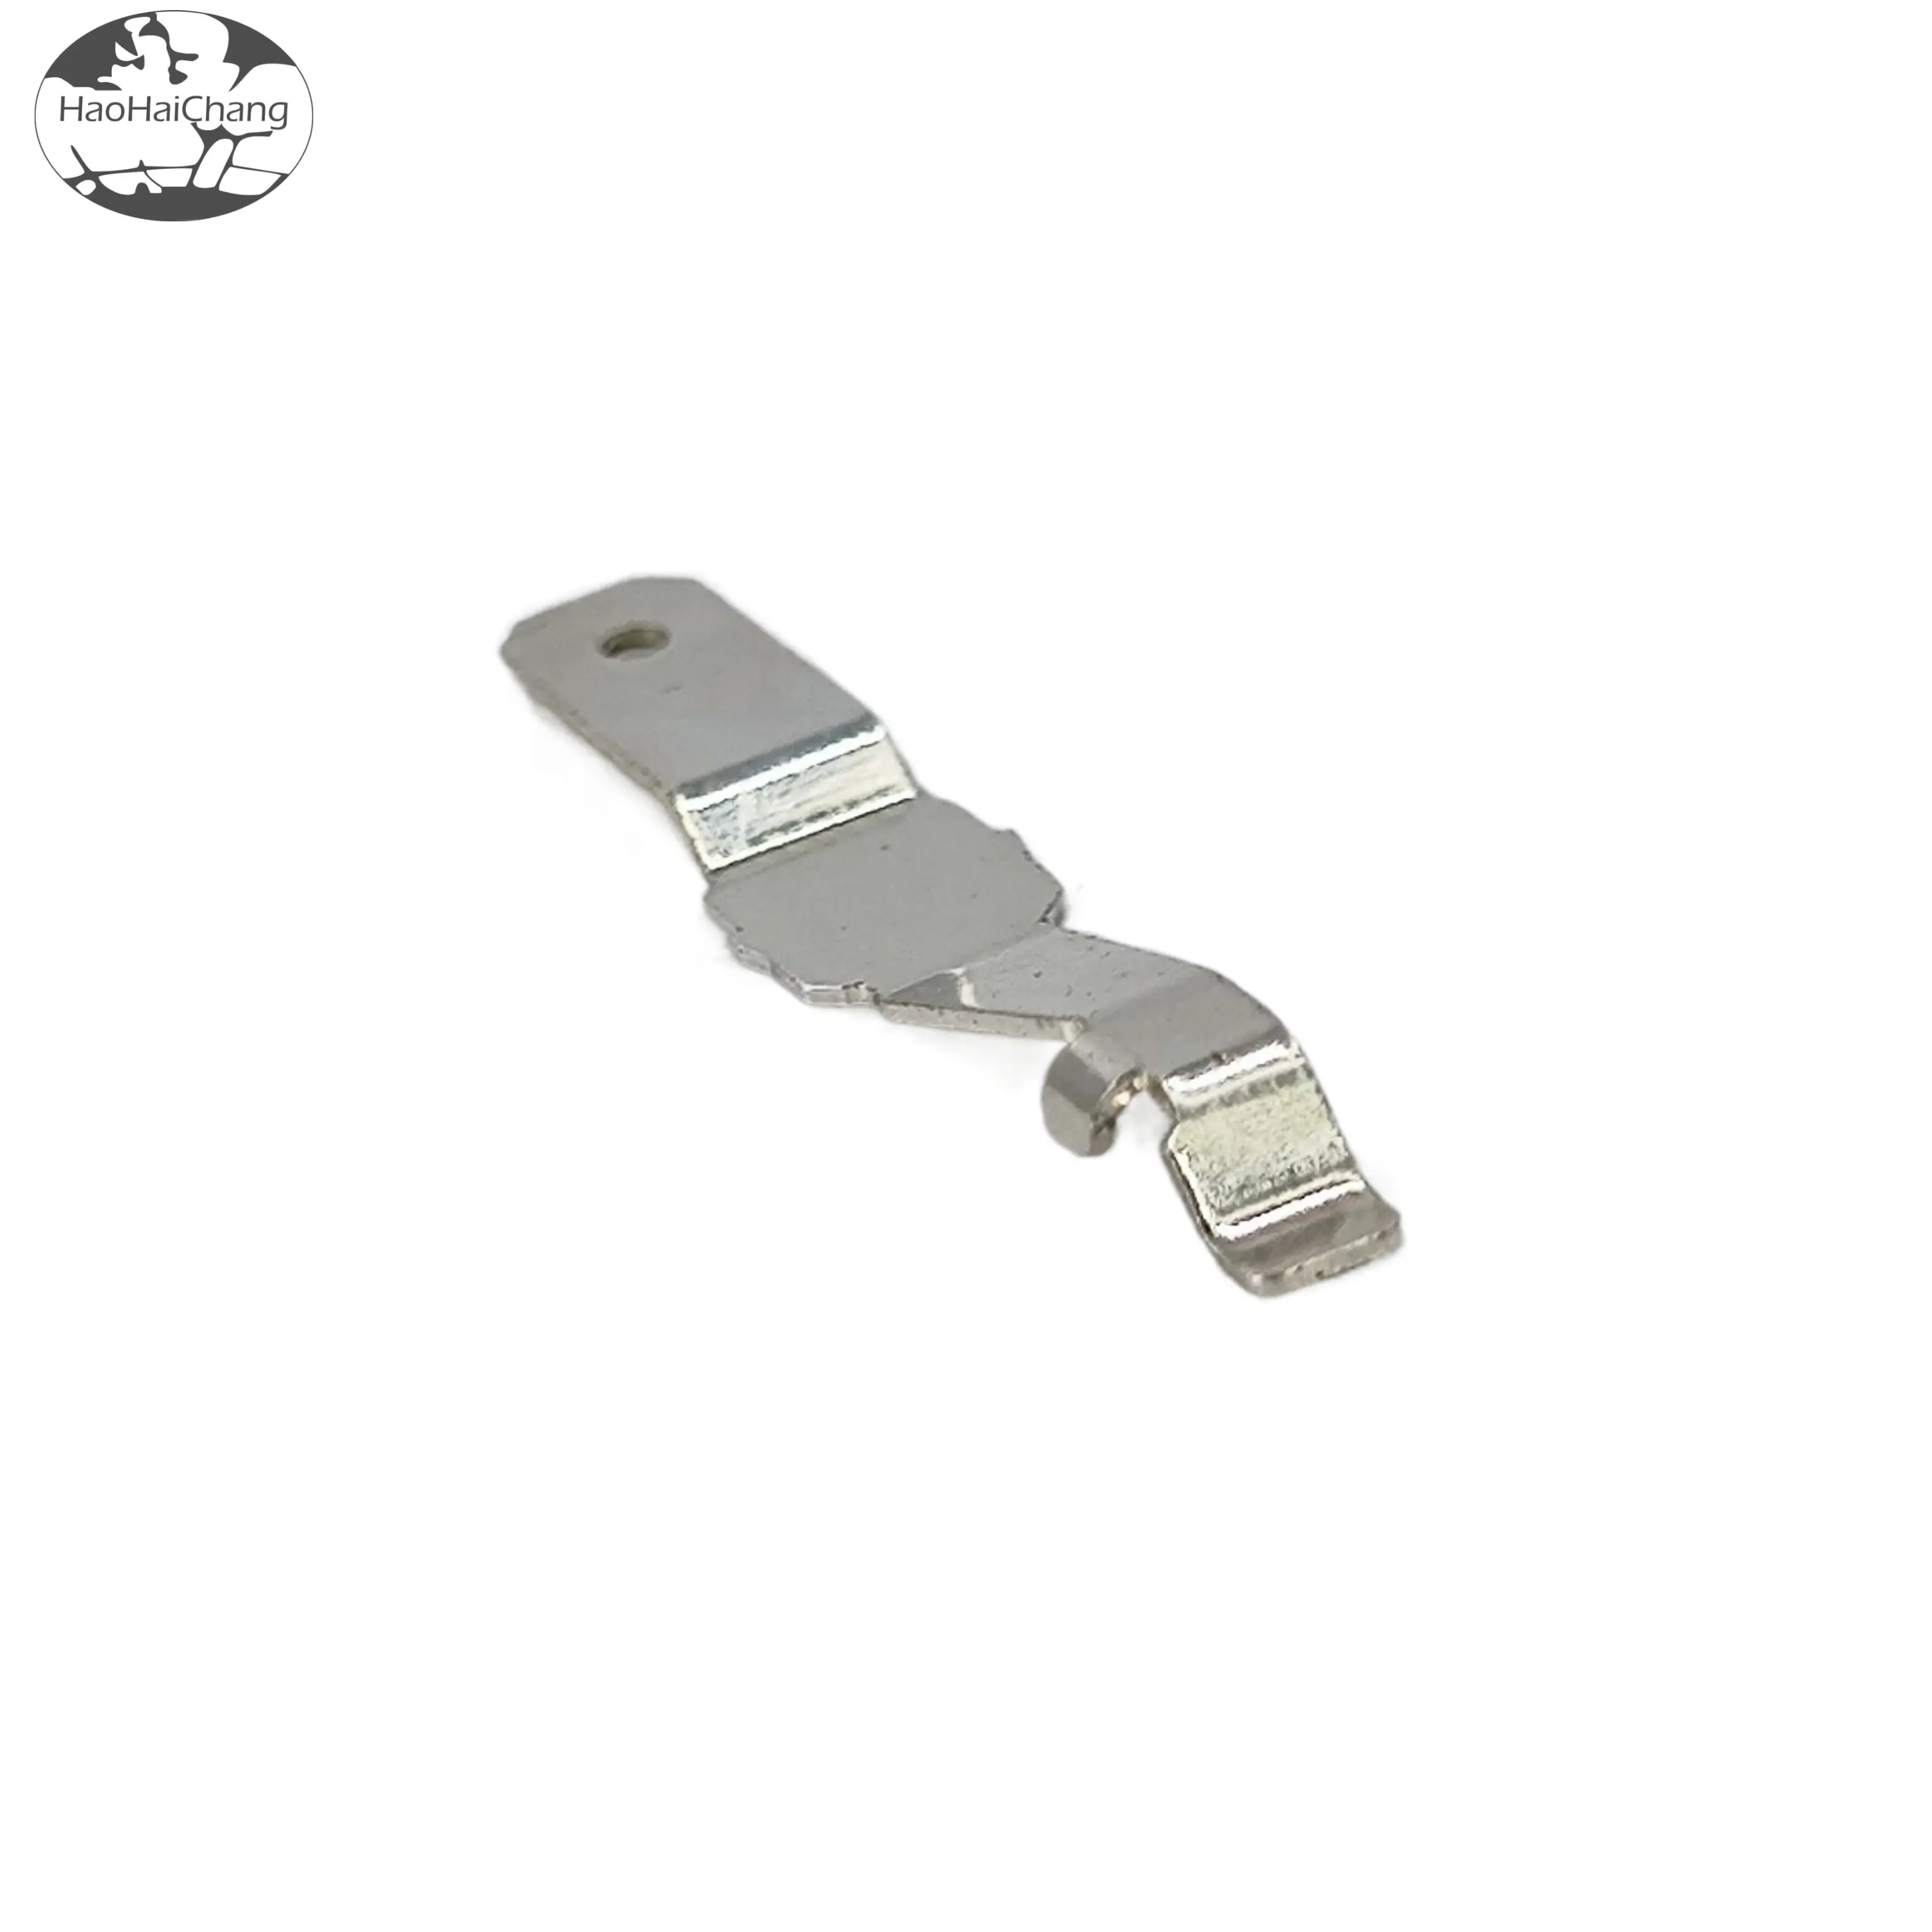 HHC-0115 Connector